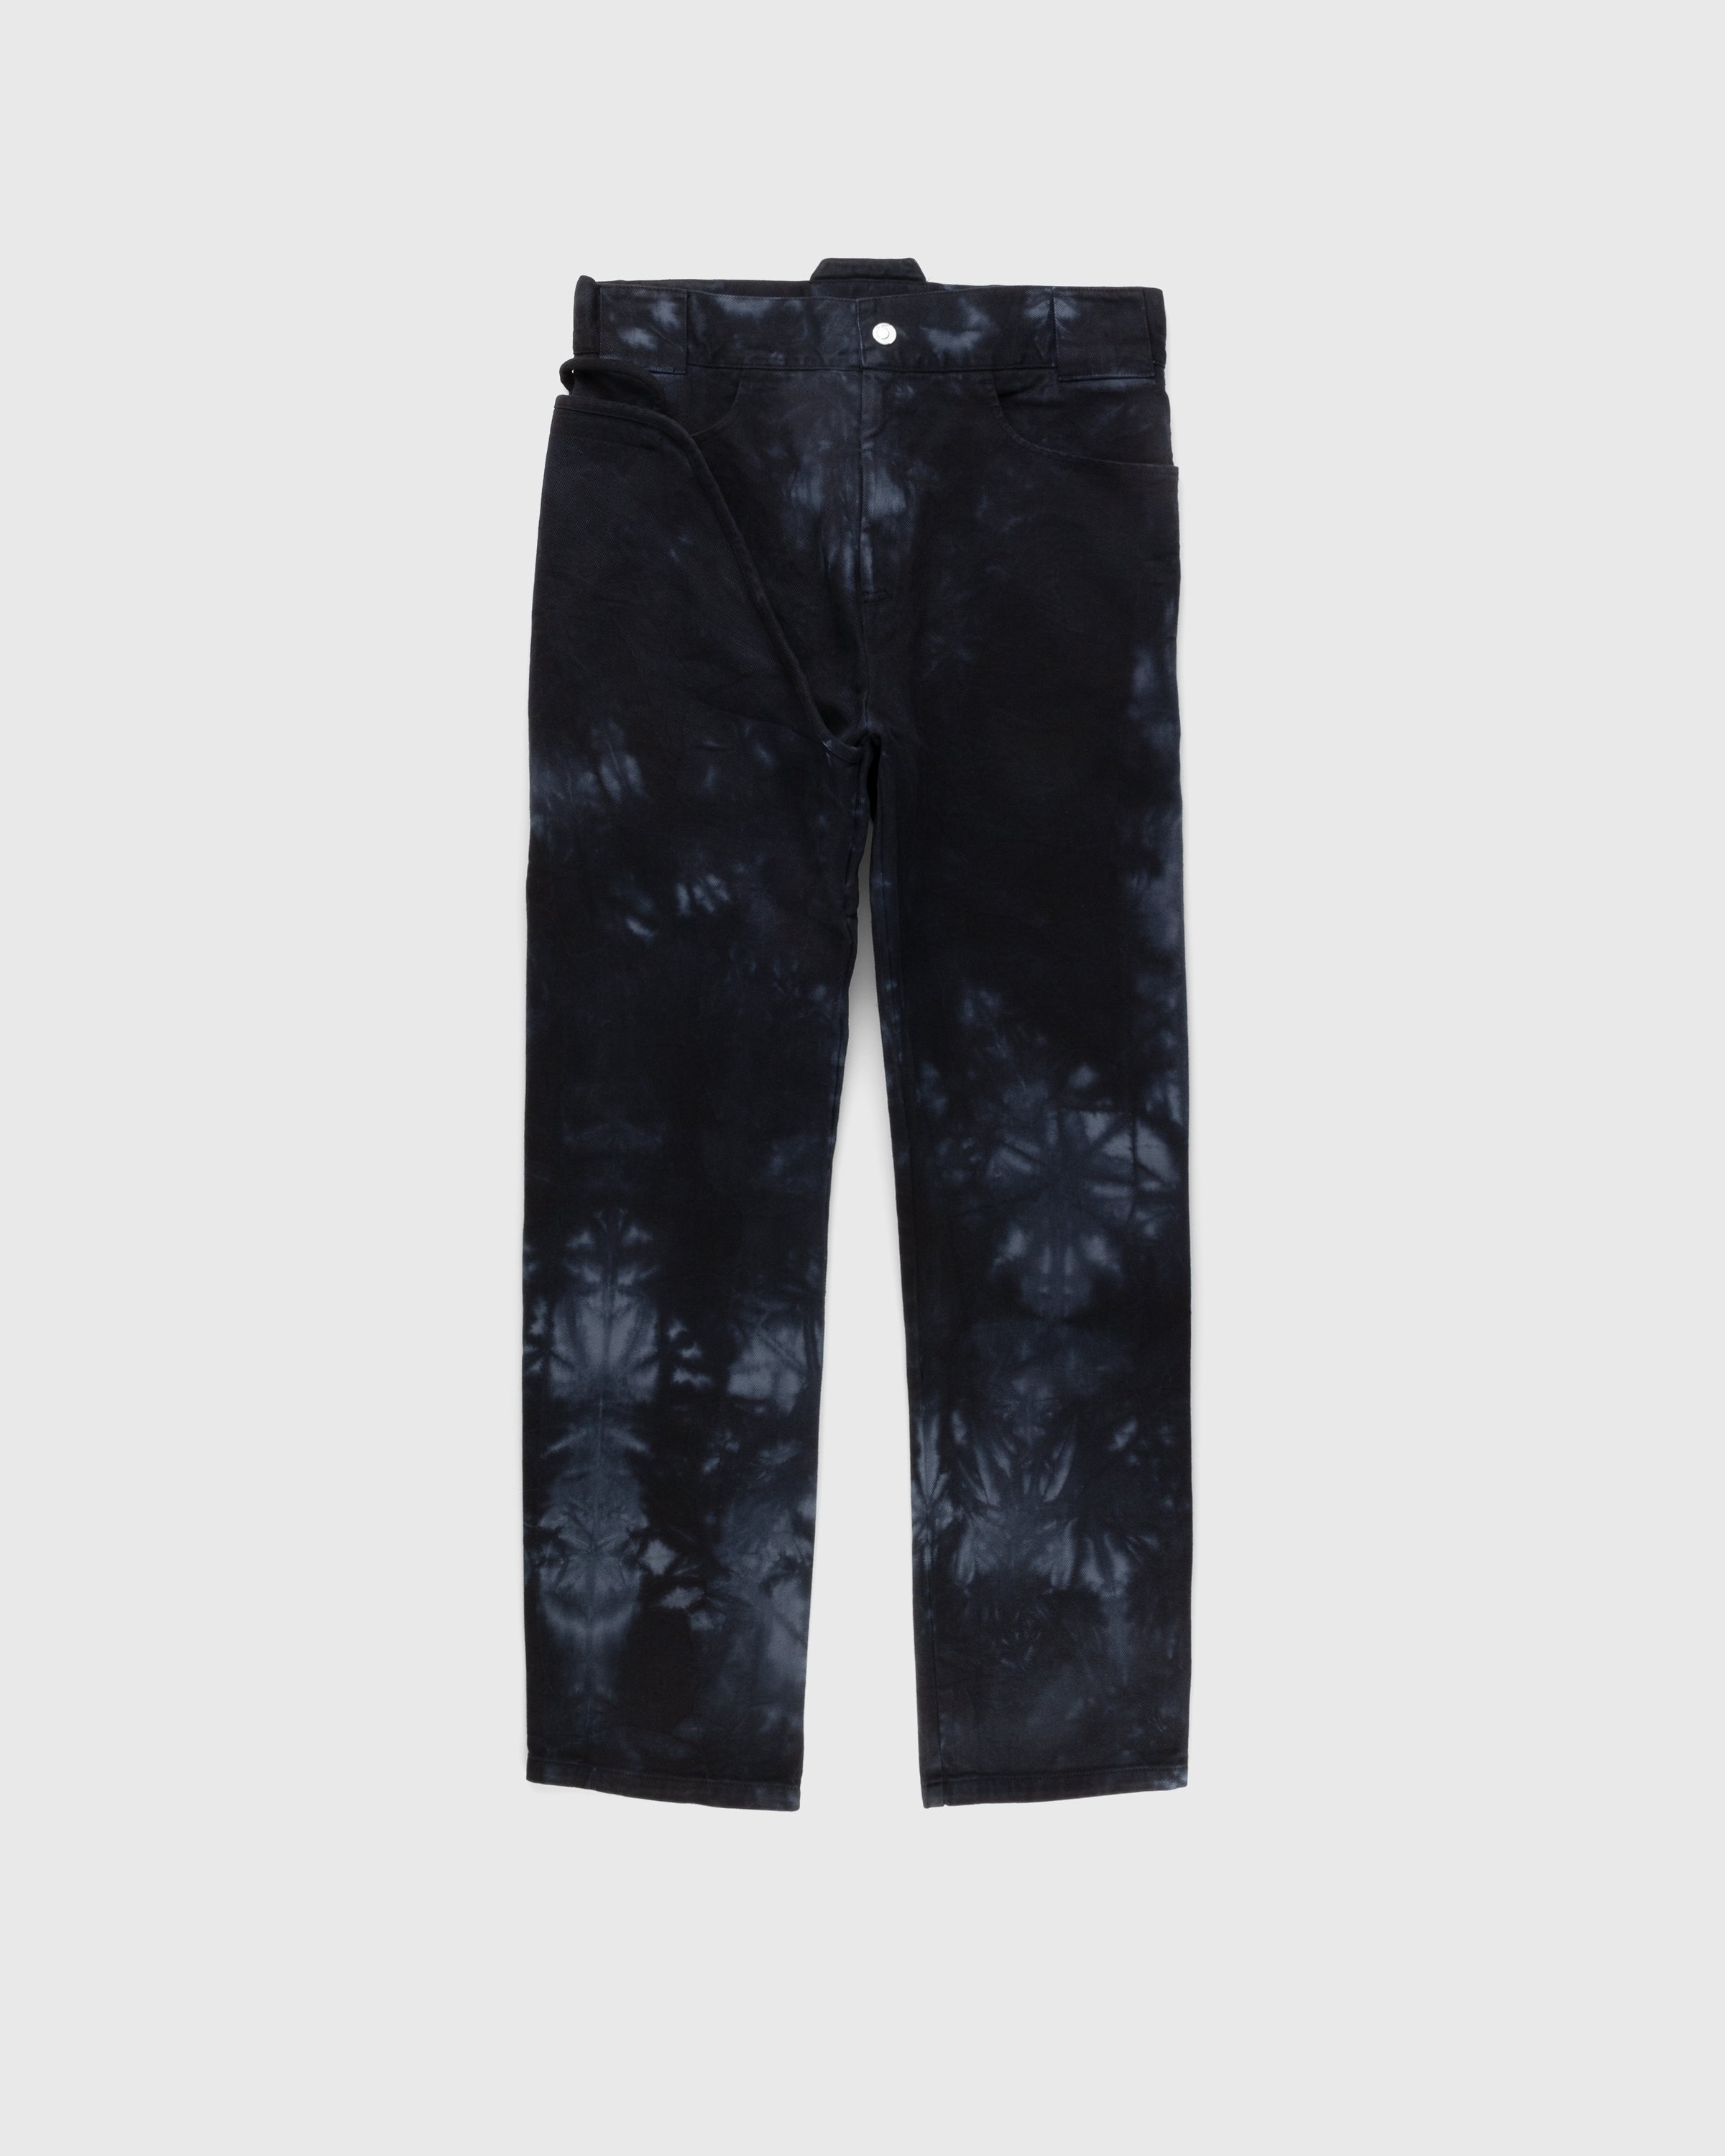 AFFXWRKS – Crease-Dyed Corso Pant Black - Trousers - Black - Image 1